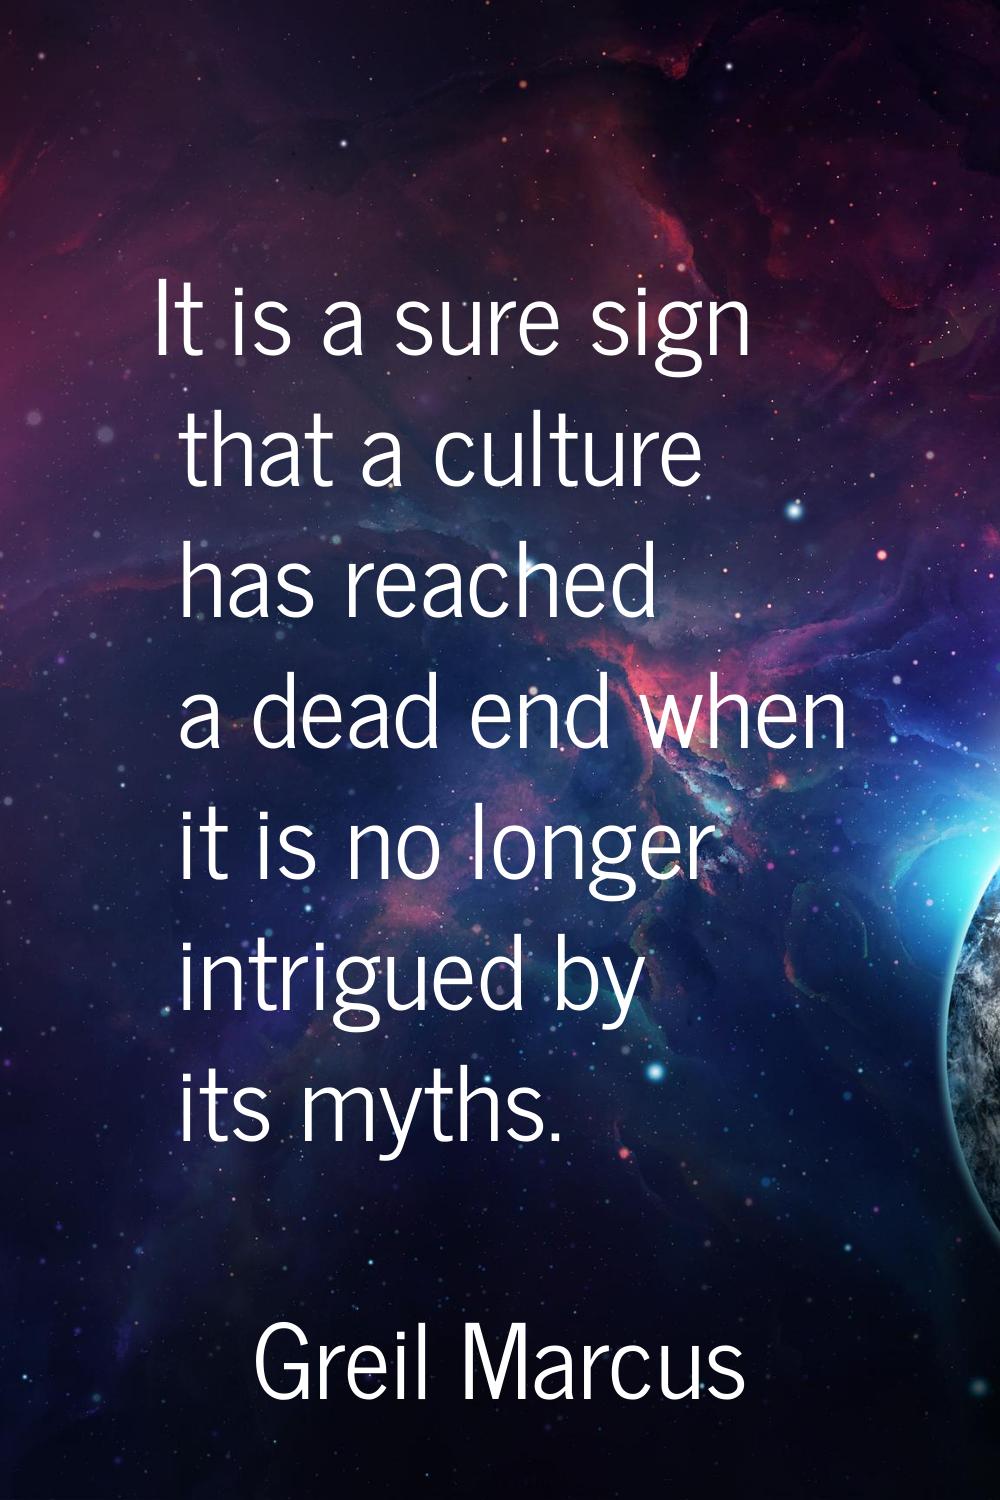 It is a sure sign that a culture has reached a dead end when it is no longer intrigued by its myths